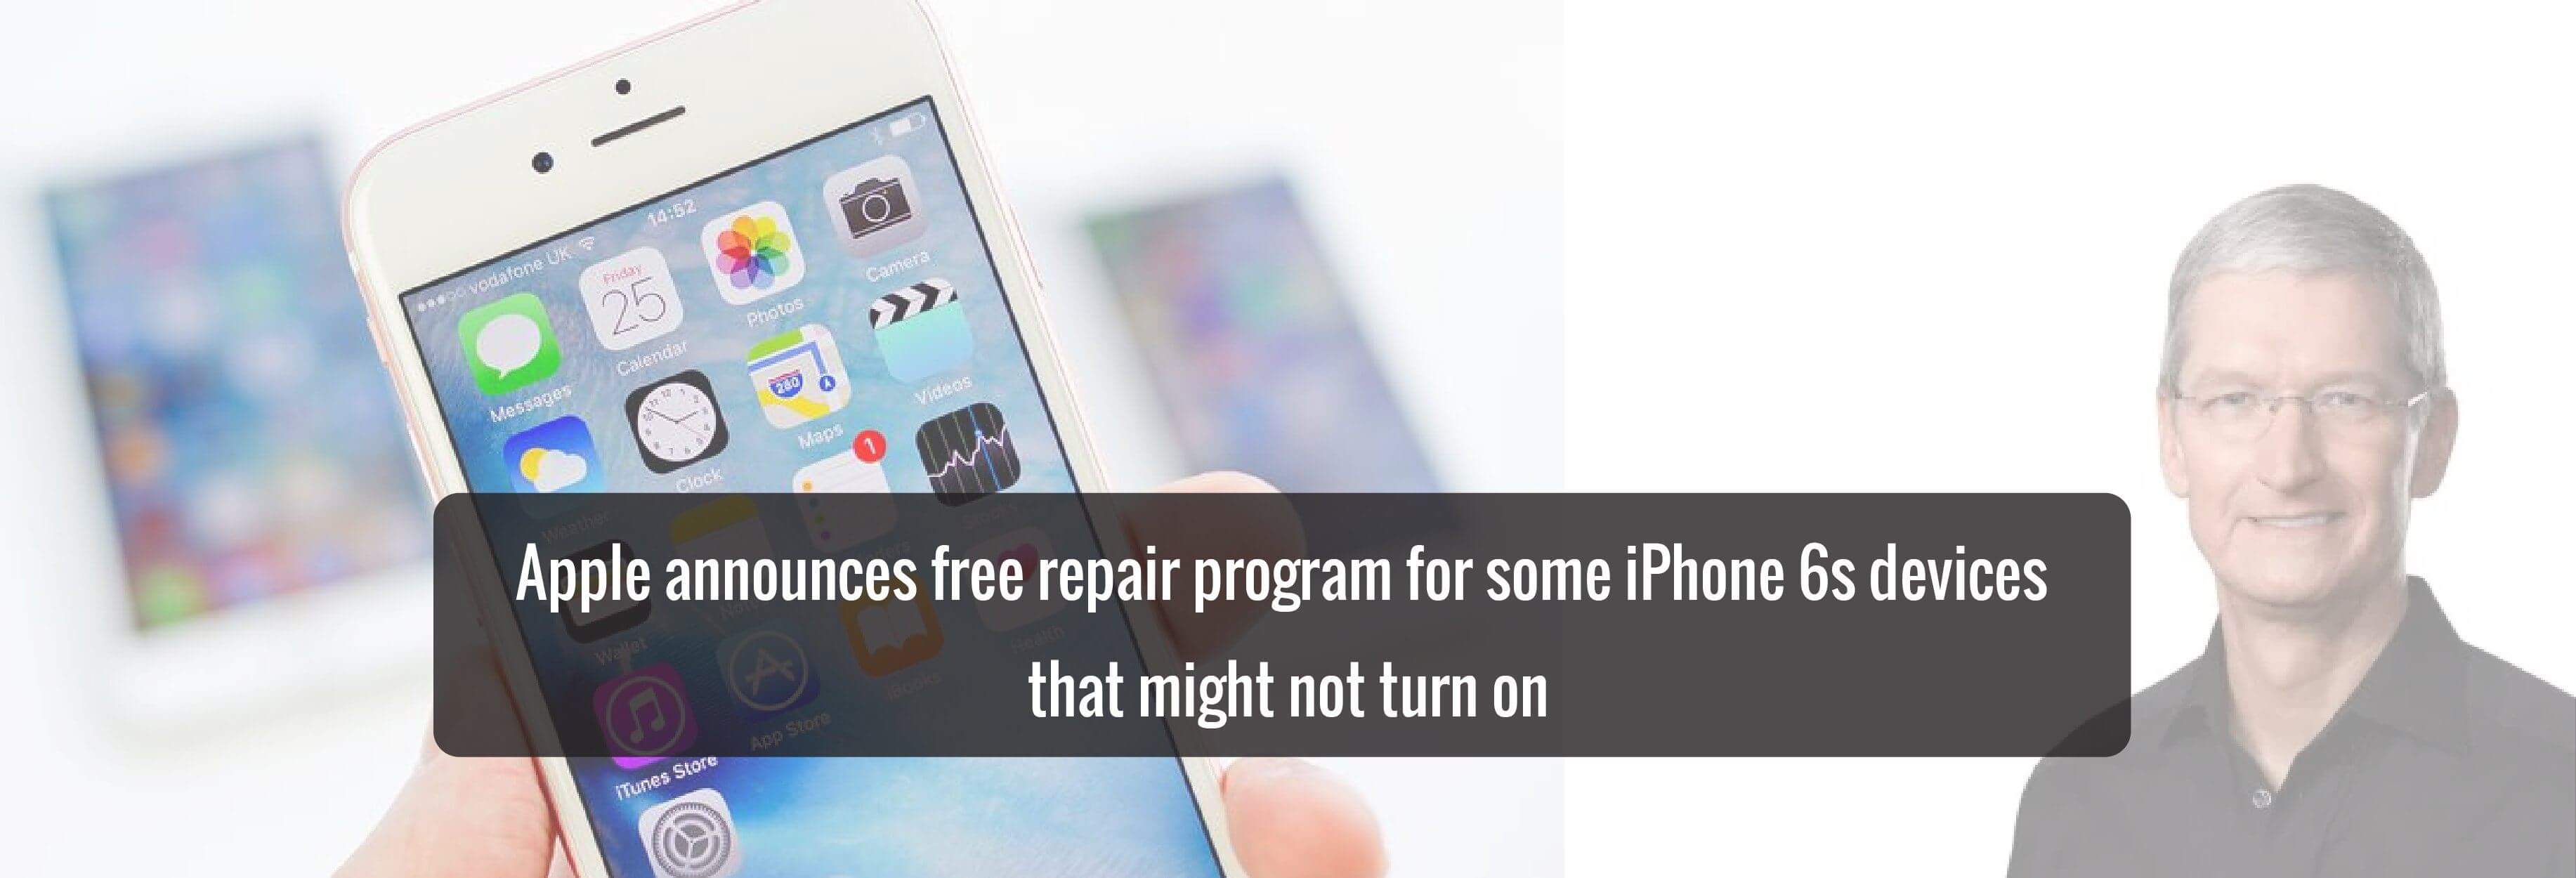 Apple announces free repair program for some iPhone 6s devices that might not turn on